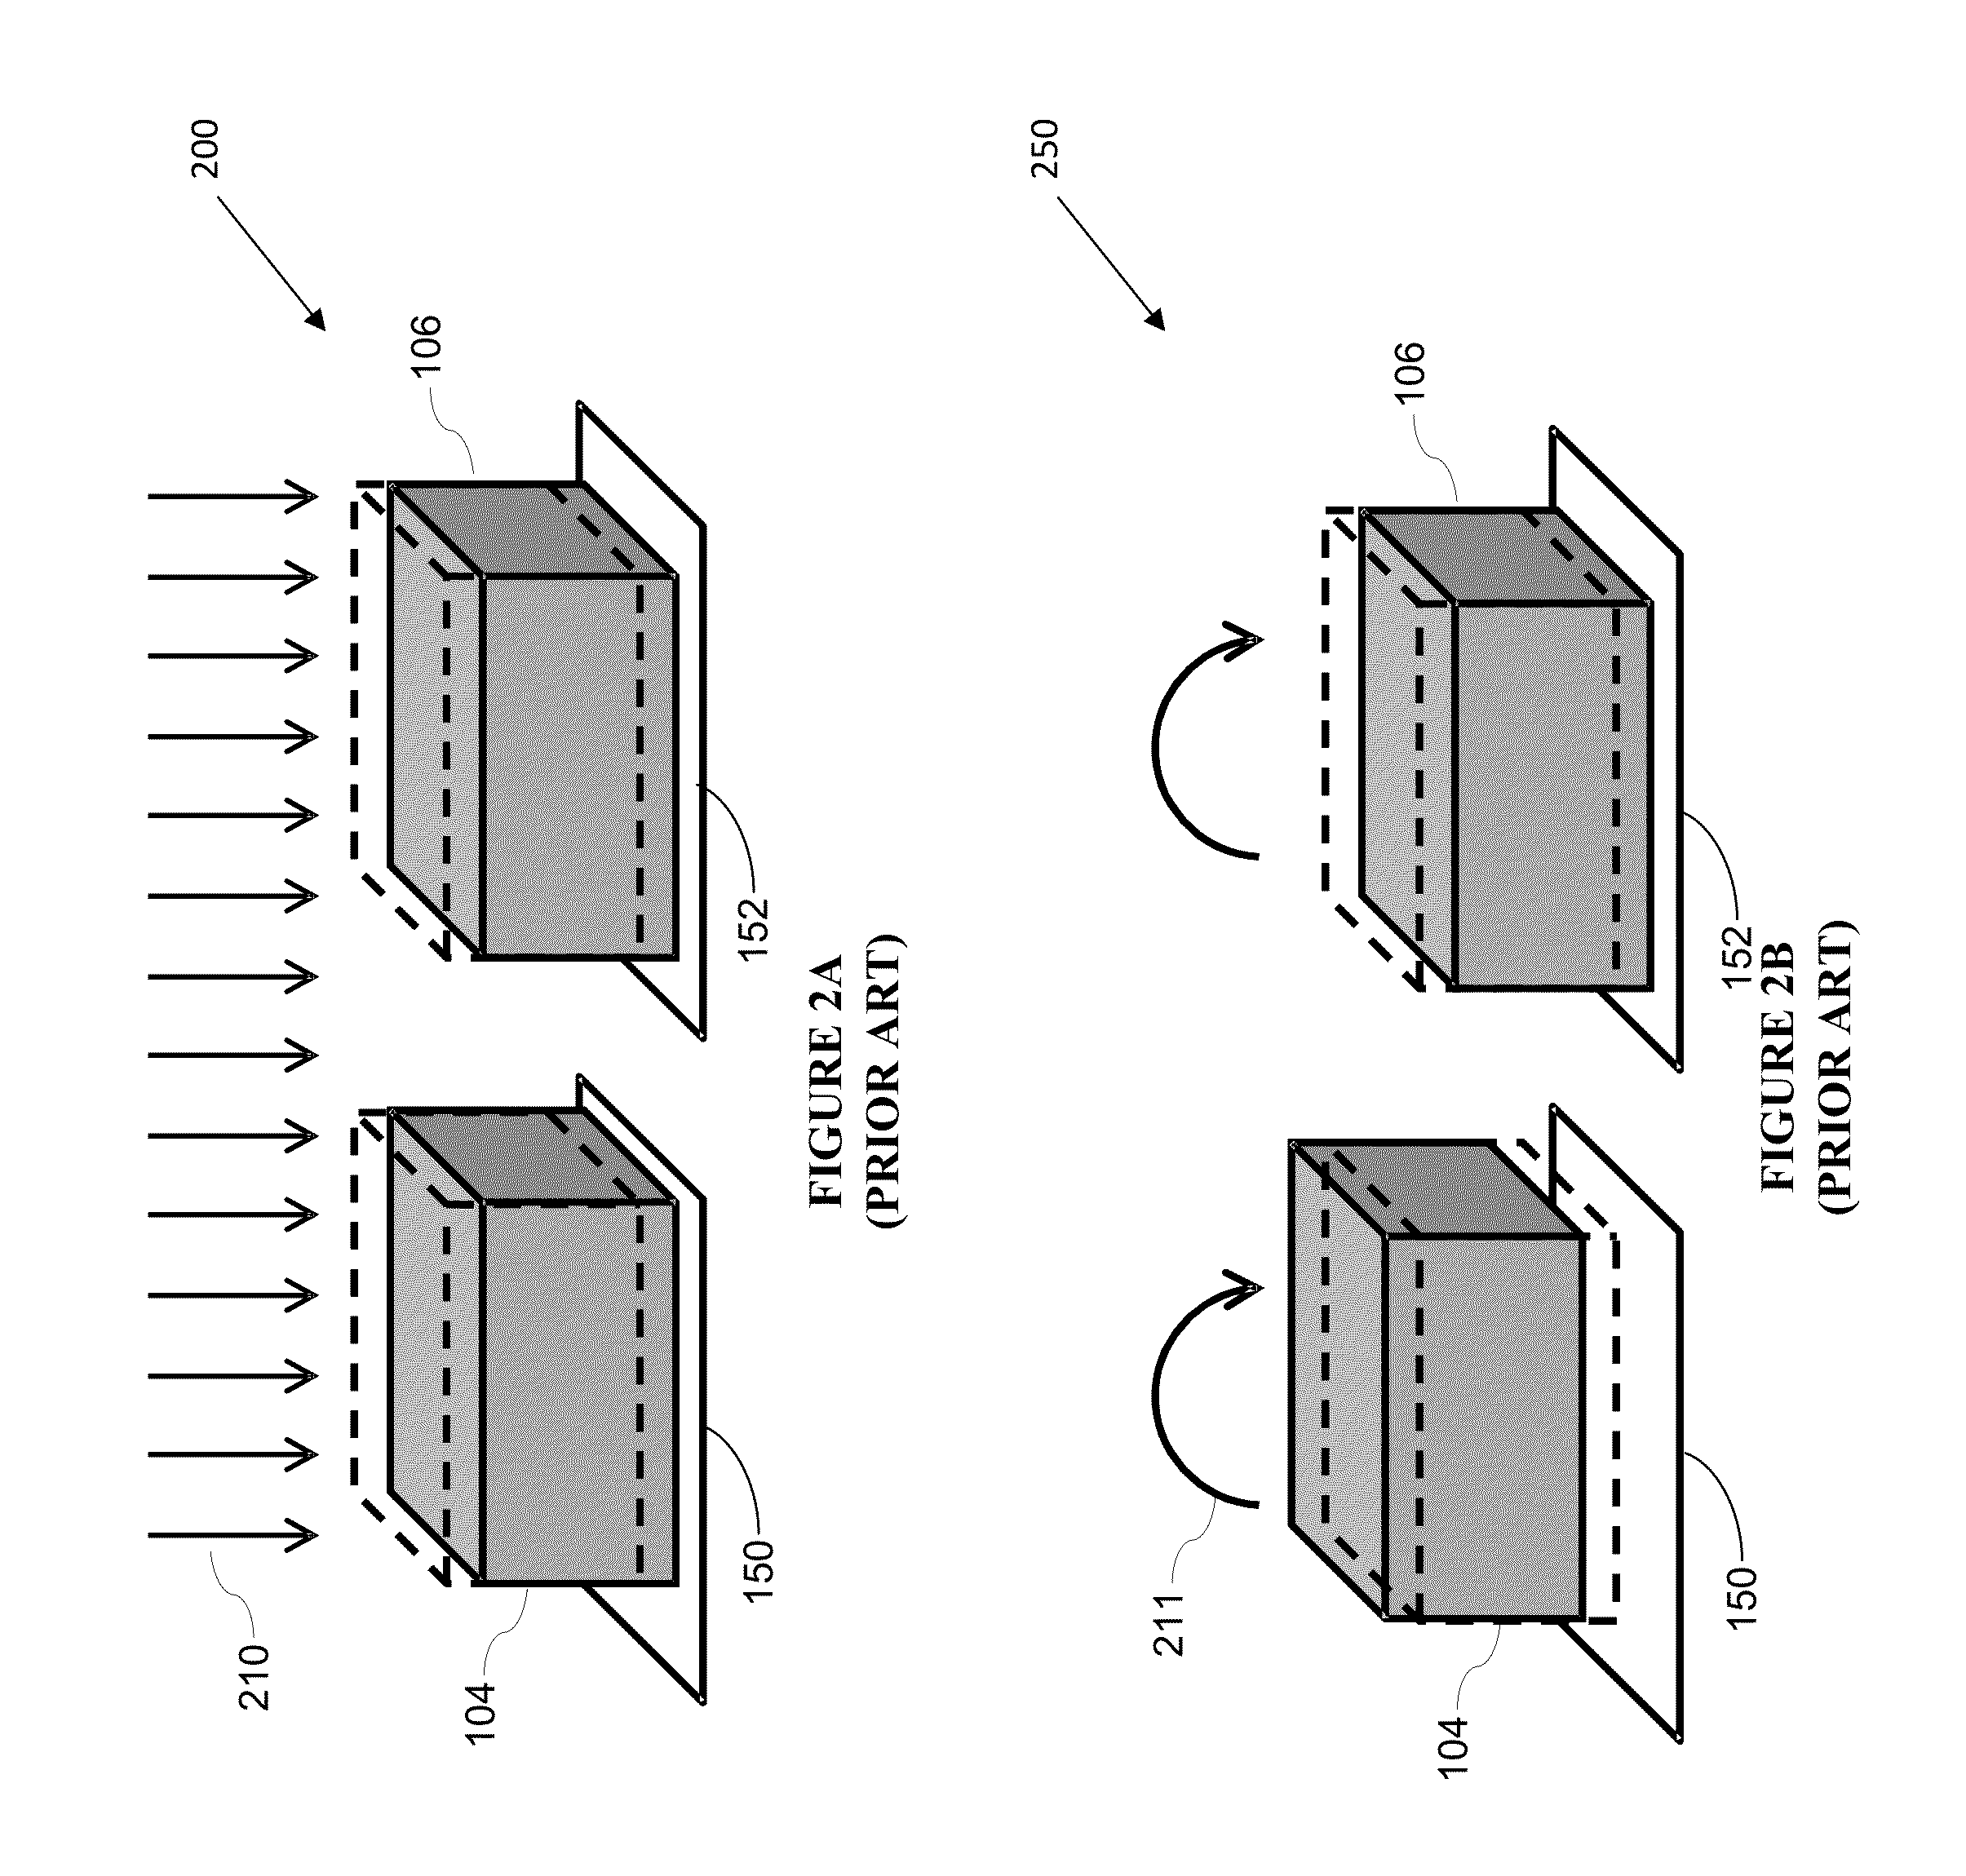 Systems and methods for MEMS gyroscope shock robustness